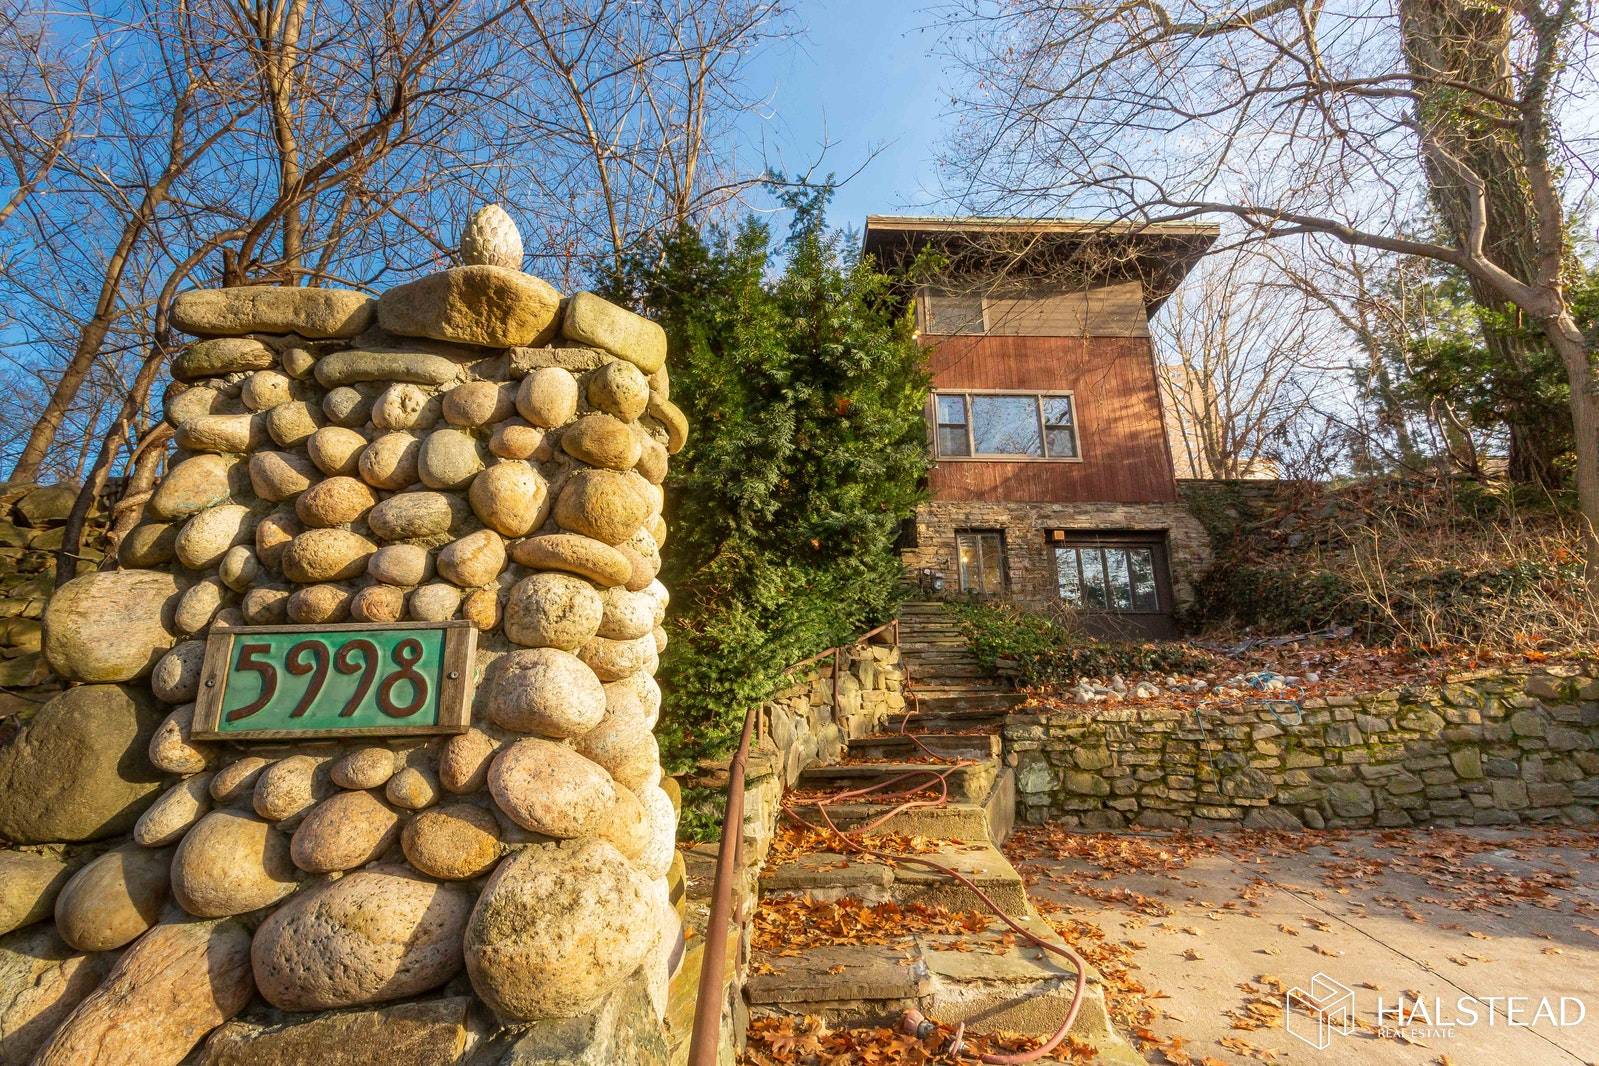 This Frank Lloyd Wright inspired home built circa 1938 is a unique North Riverdale Treasure.